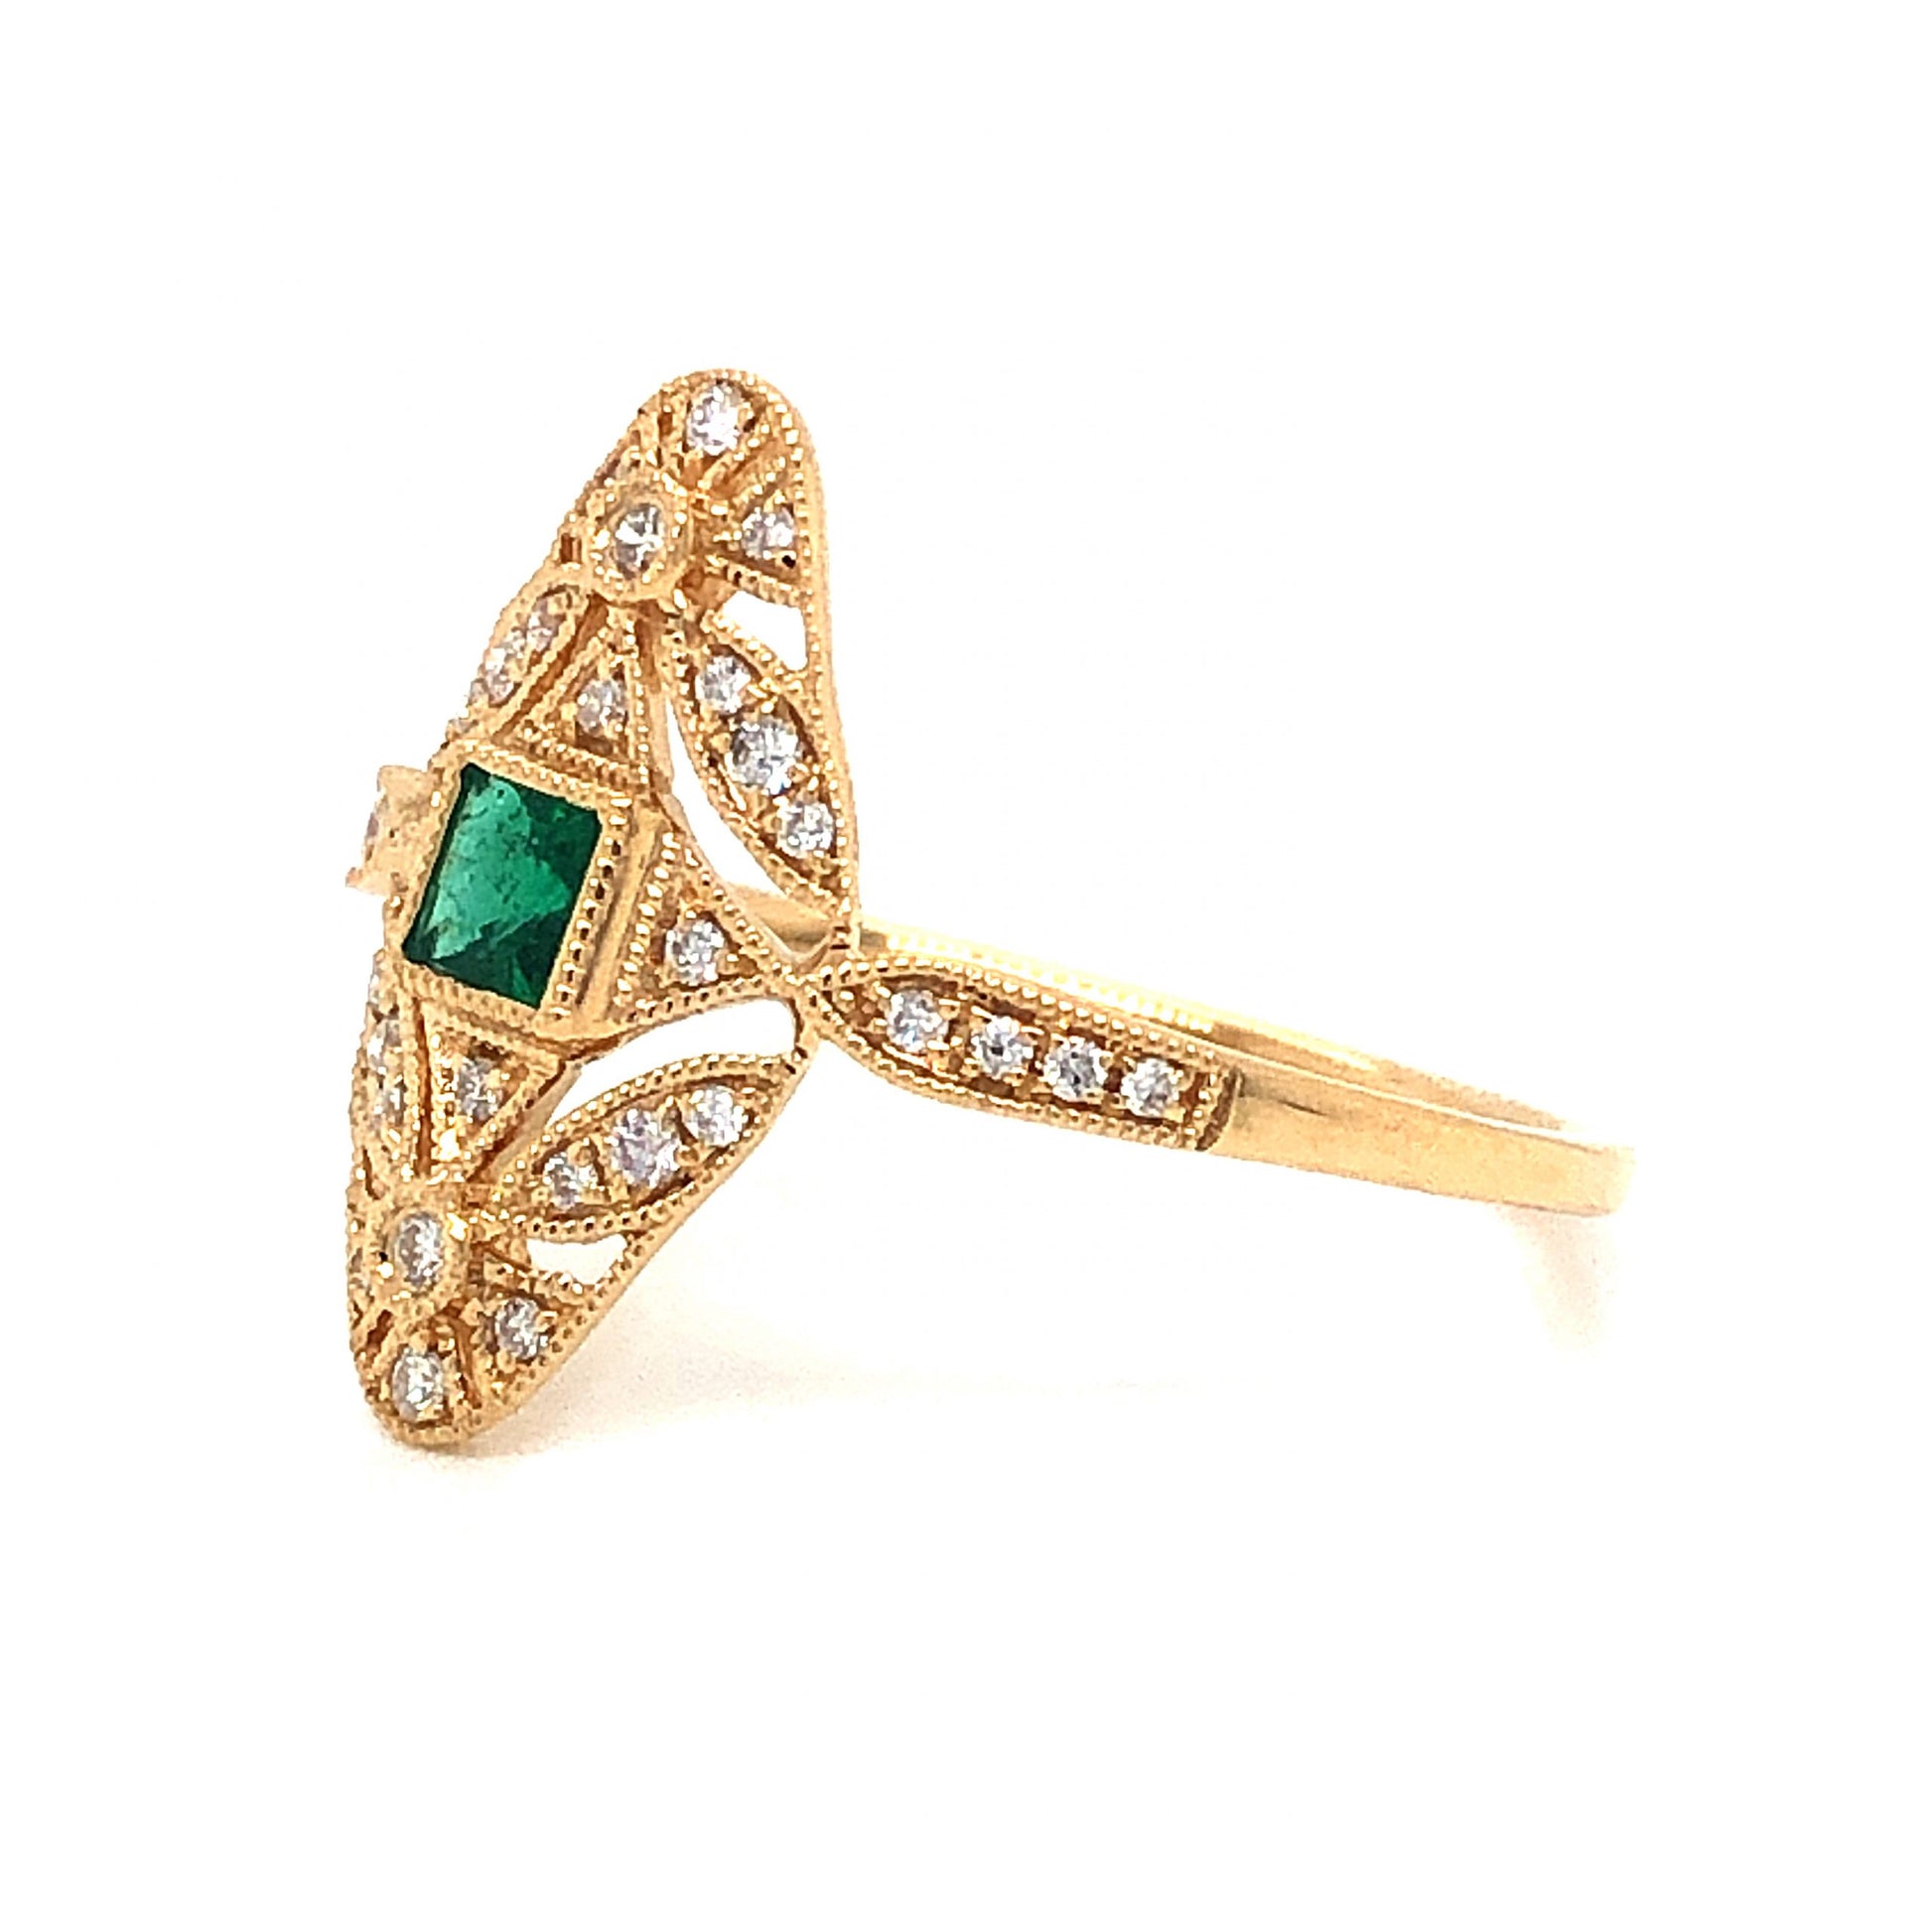 Antique Inspired Emerald & Diamond Ring in 18k Yellow GoldComposition: 18 Karat Yellow GoldRing Size: 6.5Total Diamond Weight: .13 ctTotal Gram Weight: 2.0 gInscription: JHK 18k 750